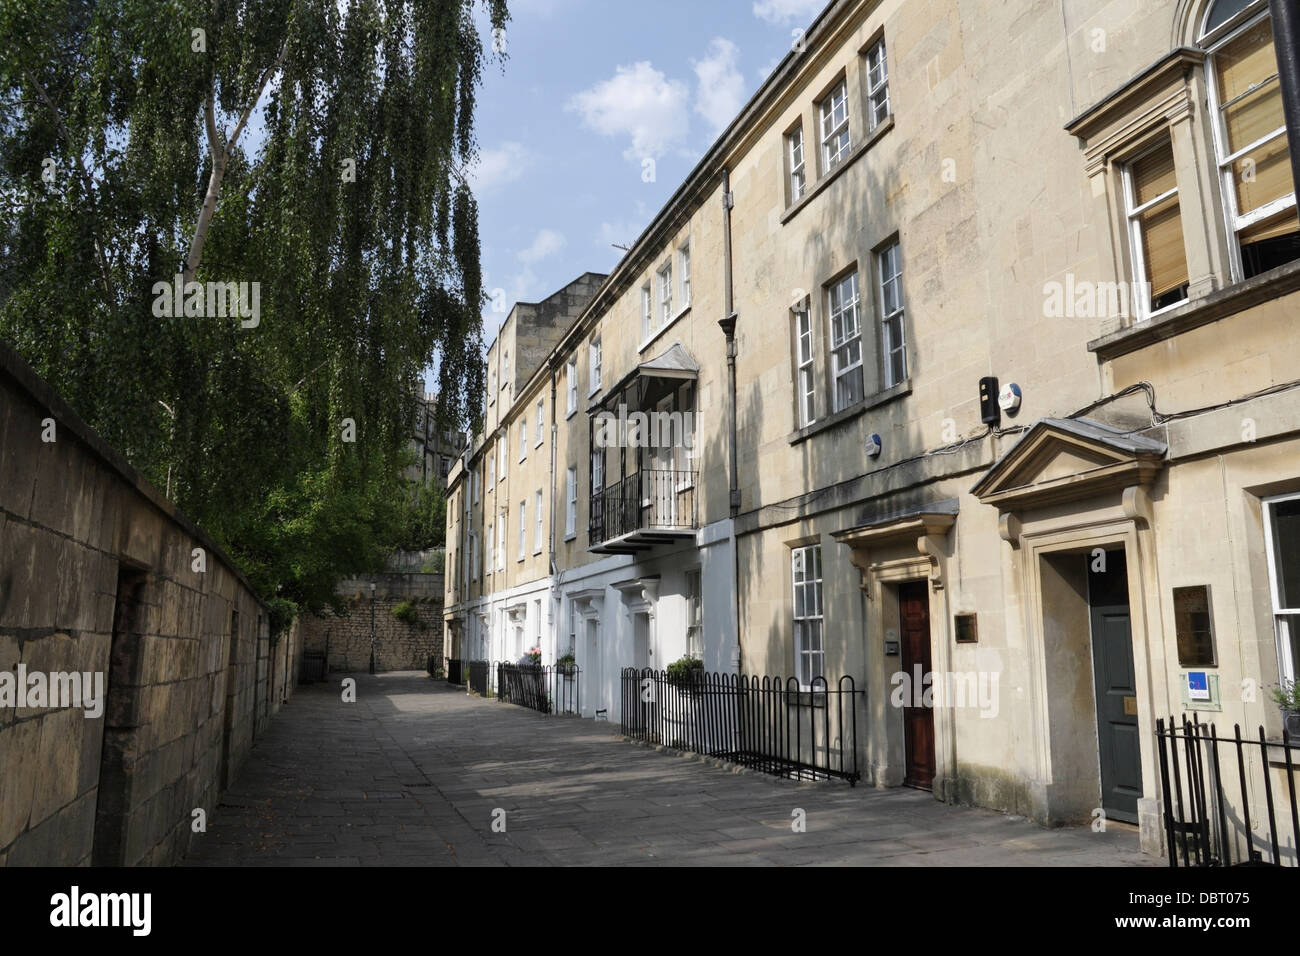 Miles Buildings in Bath England UK, Georgian Buildings row of English period houses architecture grade II listed townhouses world heritage city Stock Photo